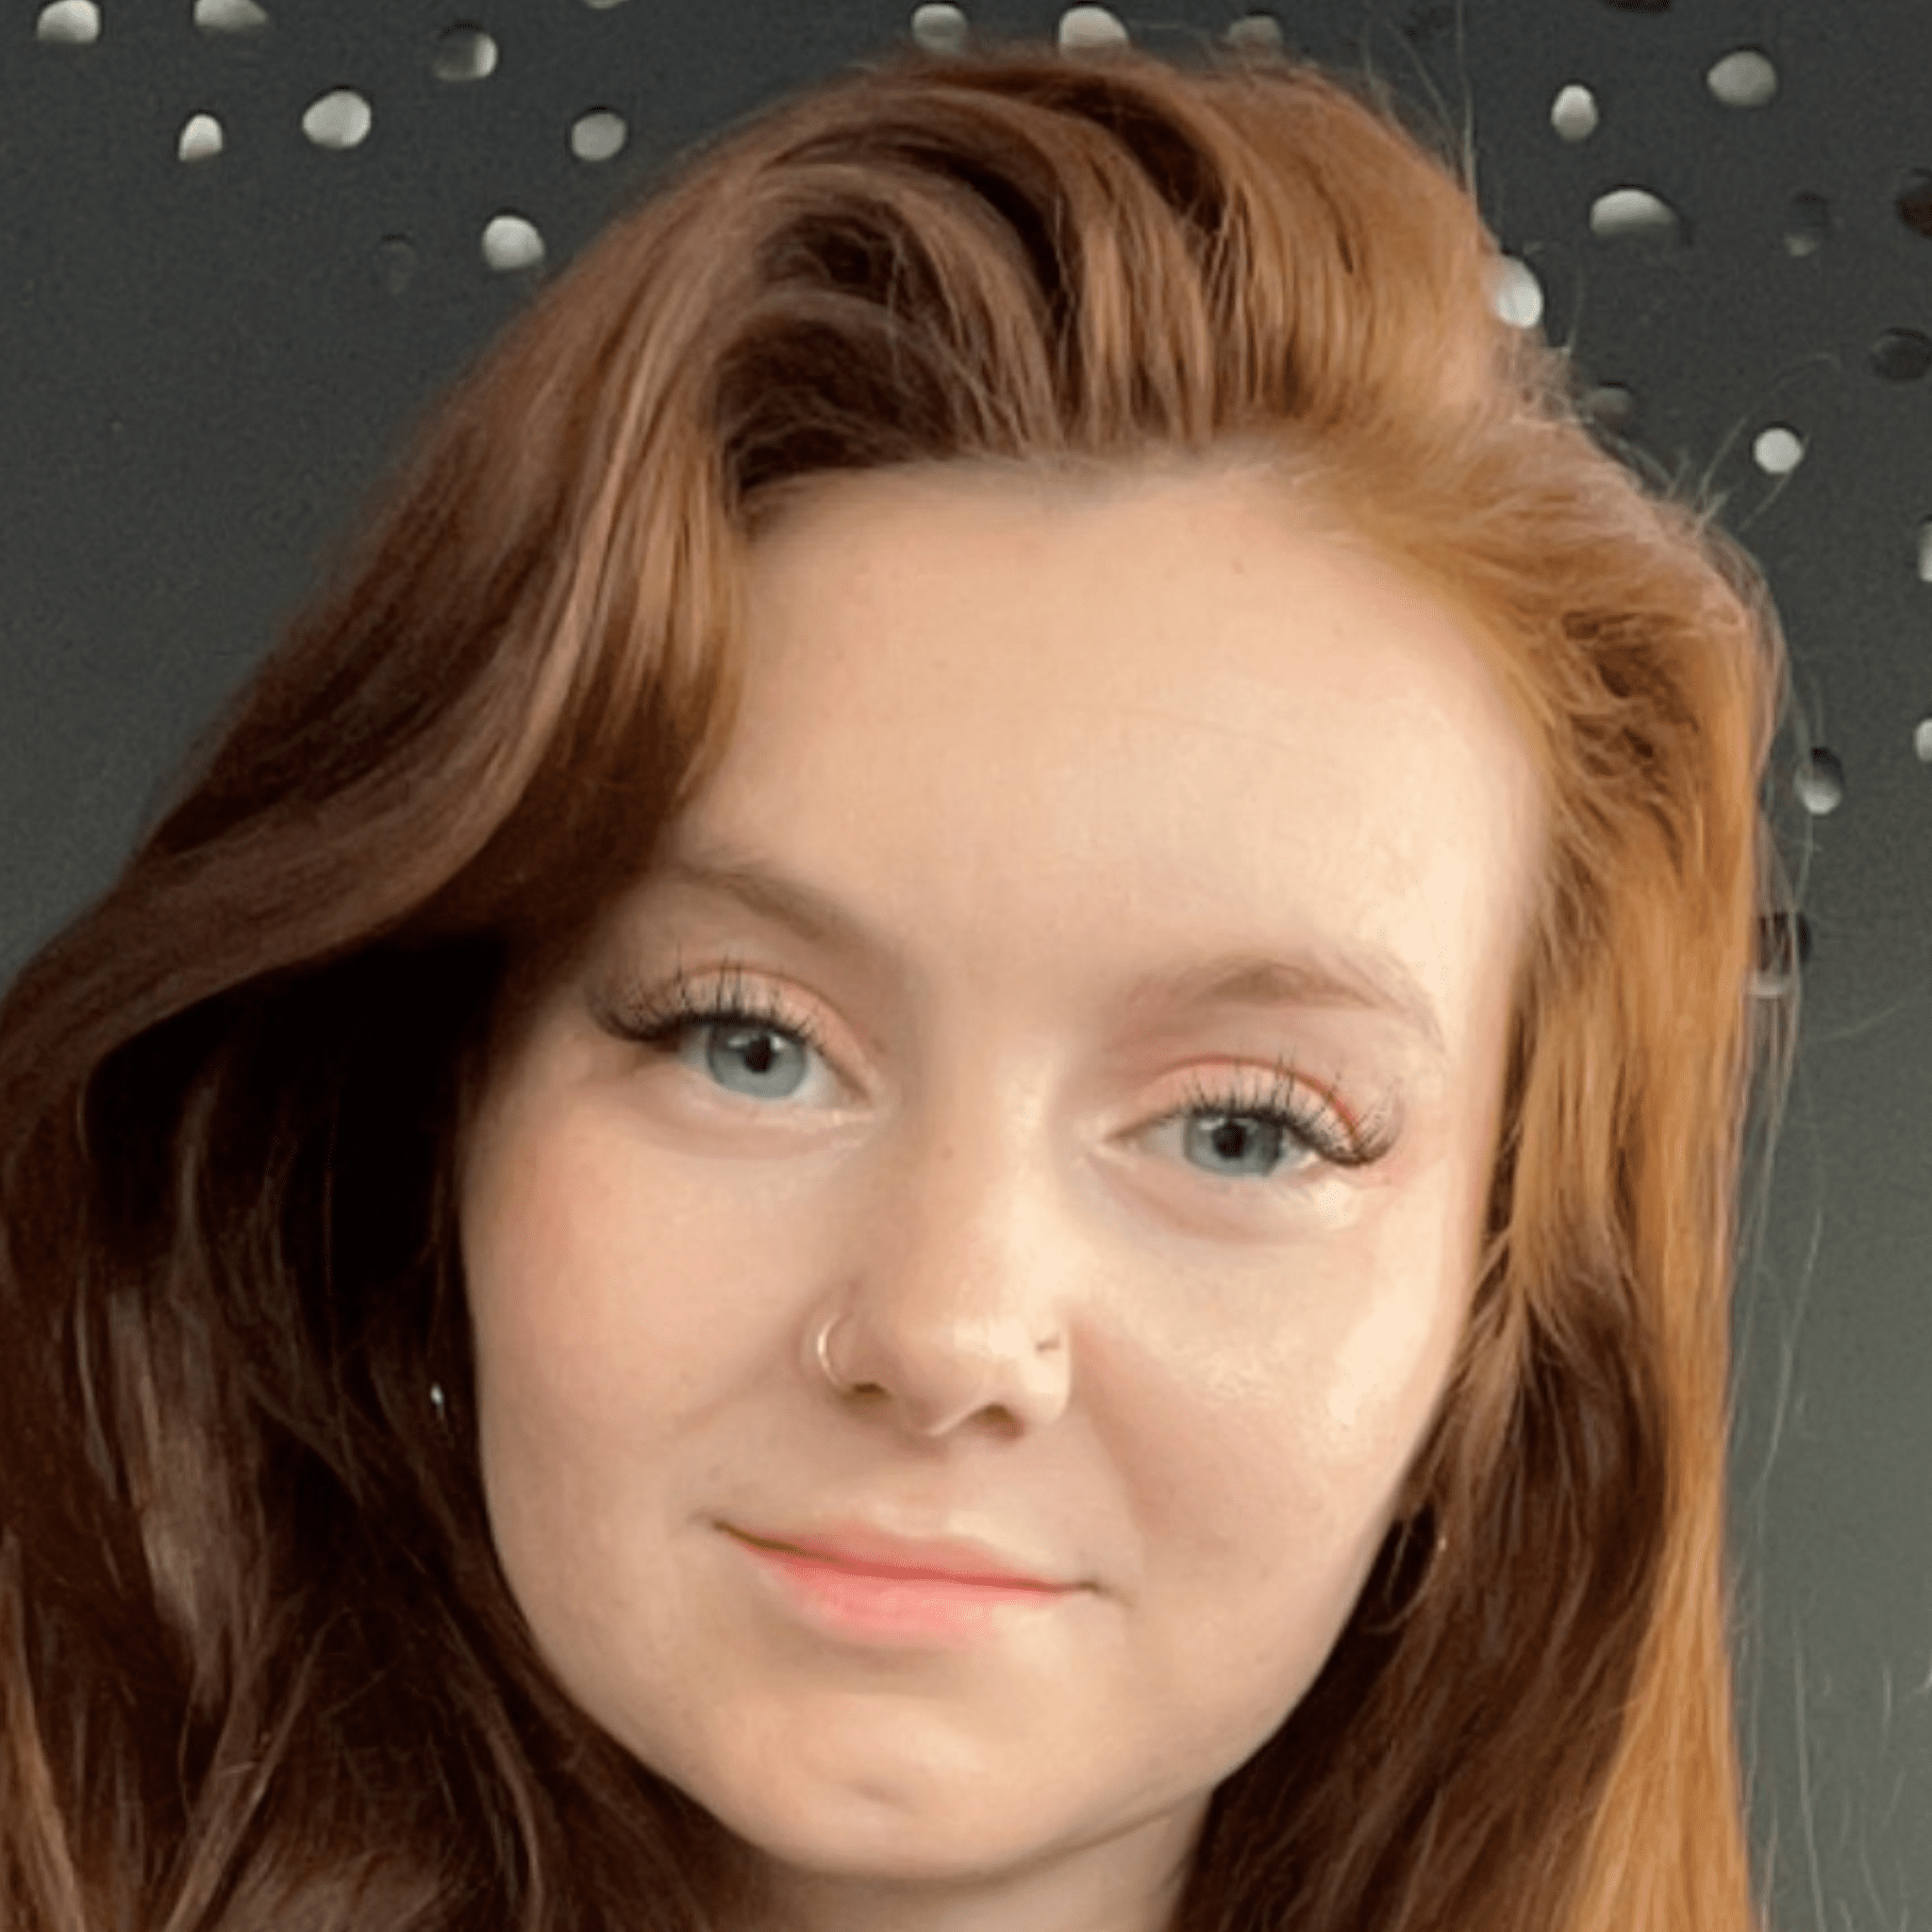 A close-up photo of a smiling woman with long auburn hair, clear skin, a nose ring, and makeup showcasing defined eyelashes. She is in front of a dark background with a pattern of light circular shapes.